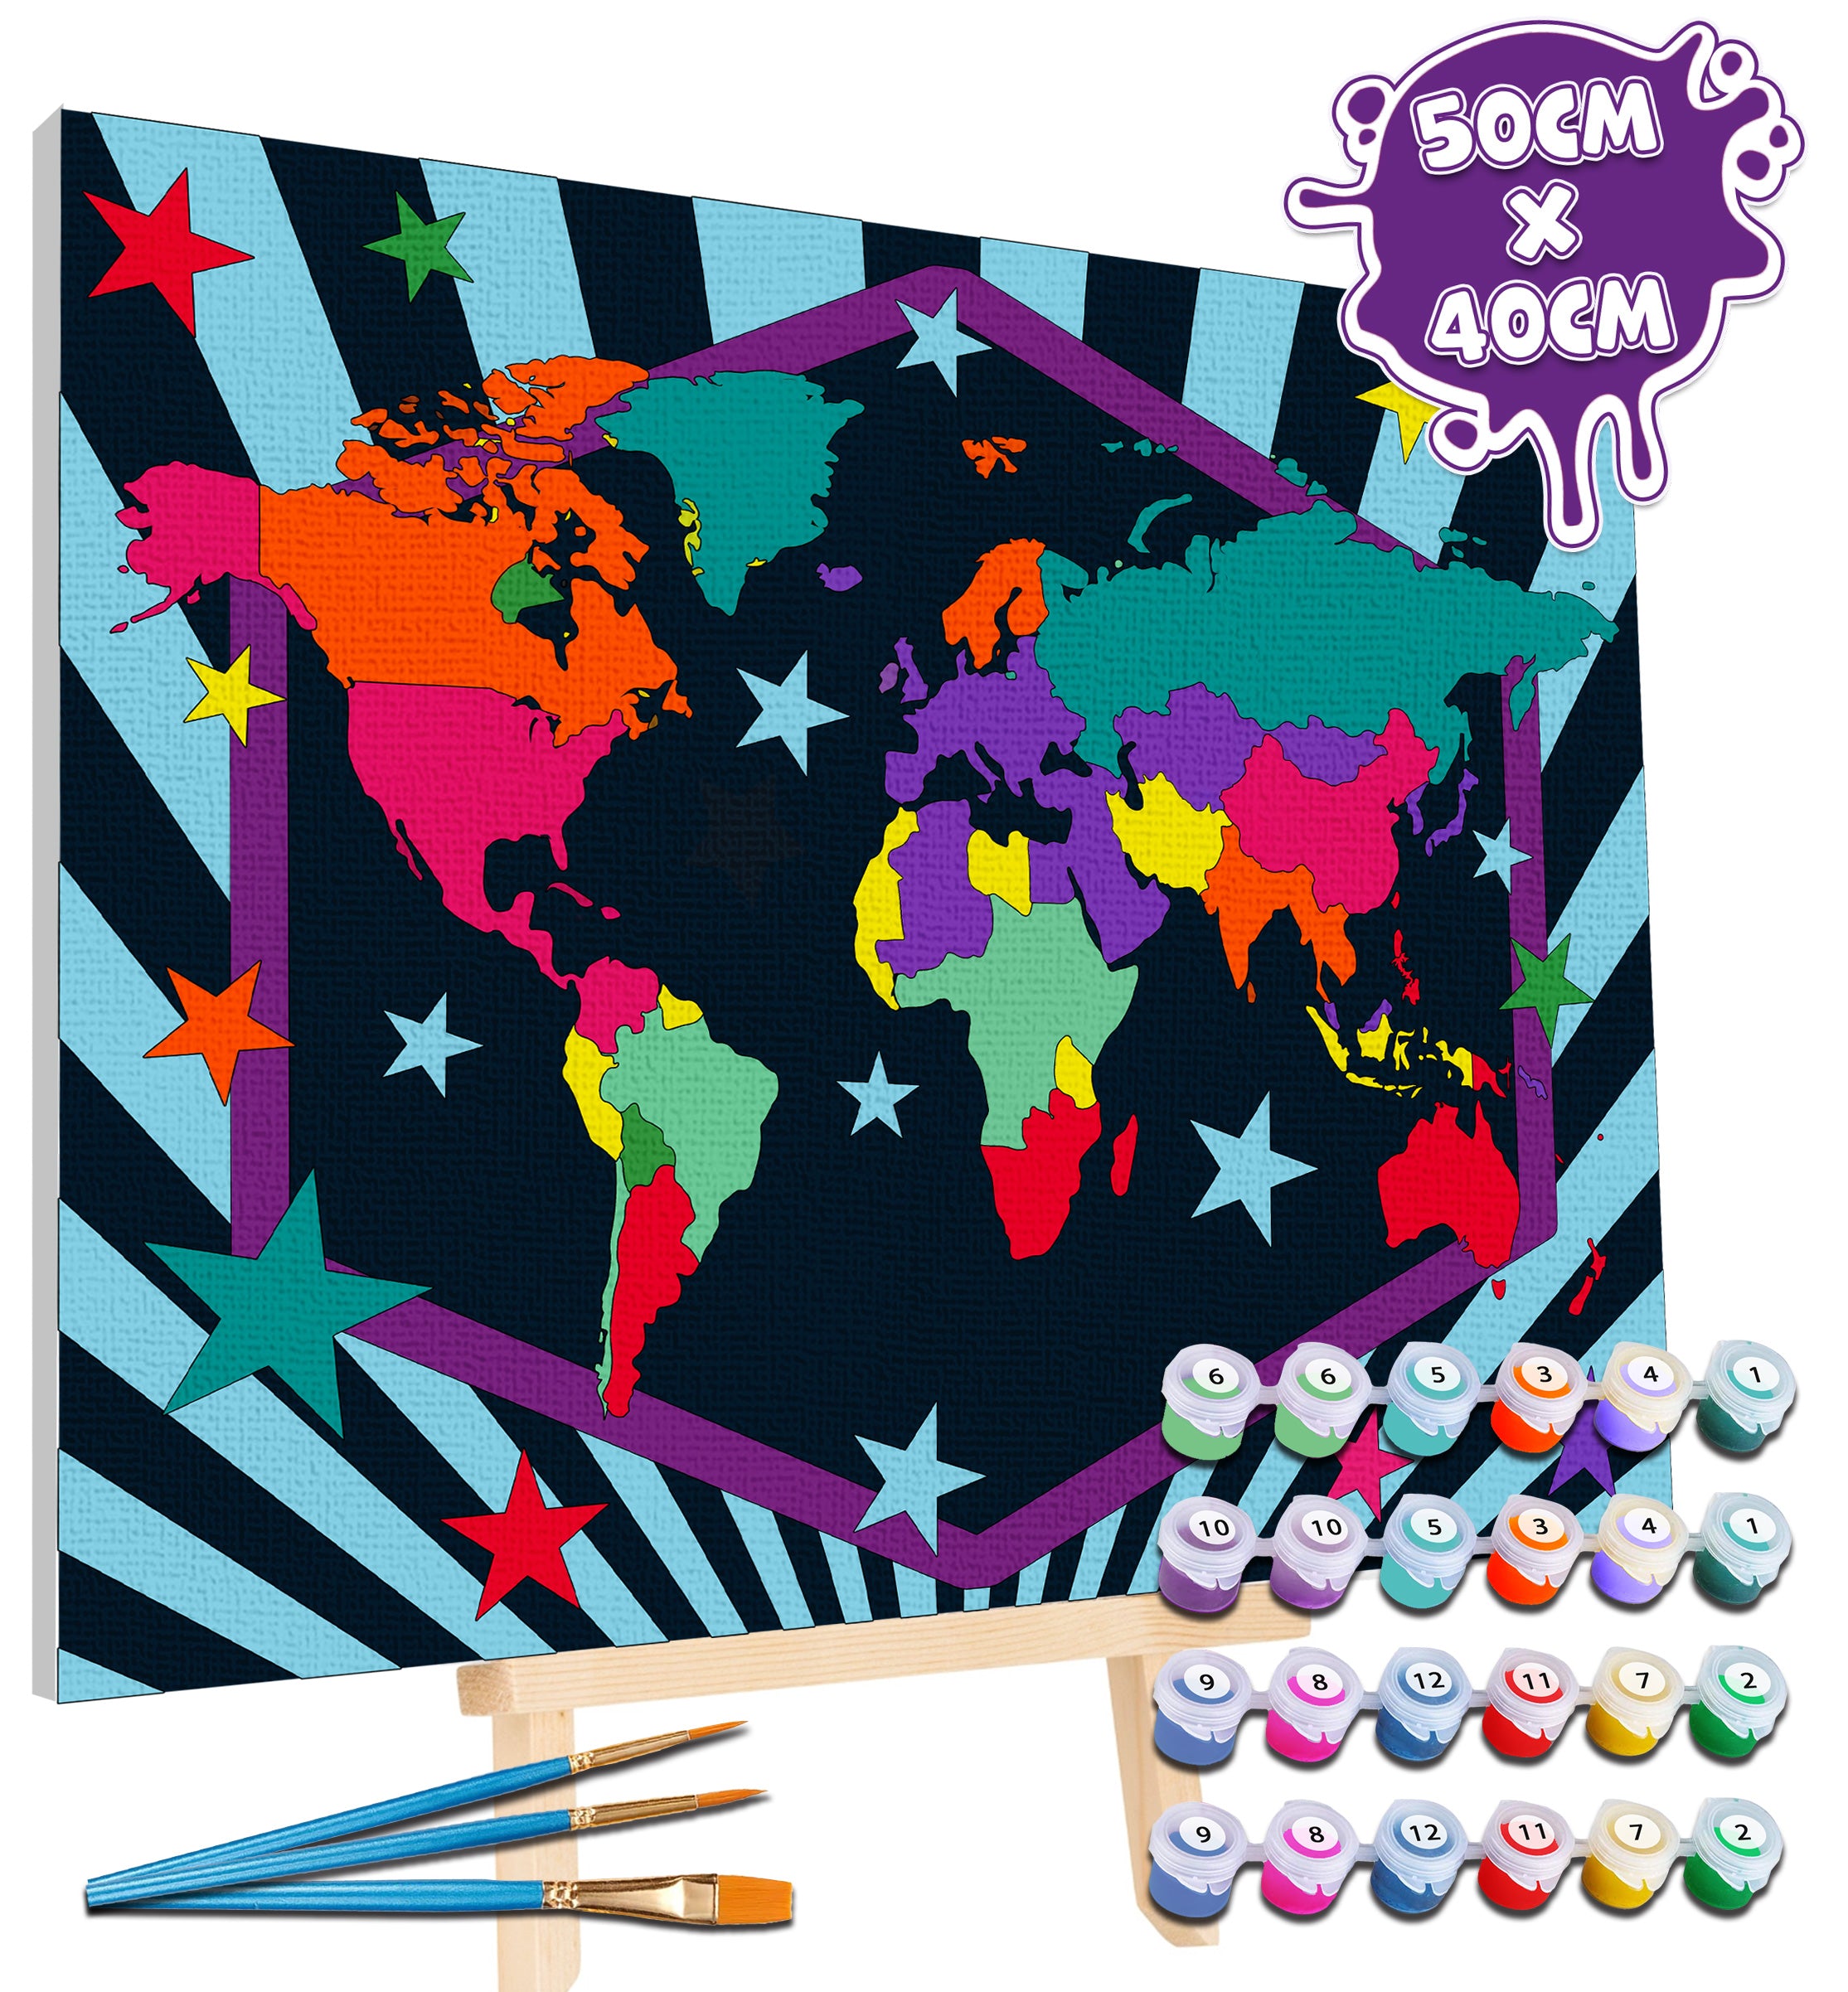 World map paint by number, world map painting, world map painting for kids, world map painting easy, world map painting by numbers uk, work map painting set, washable acrylic paints, world map gifts, paint by number on canvas, paint by numbers ready for wall mounting, paint by numbers for kids, paint by numbers for beginners, paint by numbers for children, paint by numbers with frame, world map canvas, world map wall art, world map poster for kids, framed paint by numbers